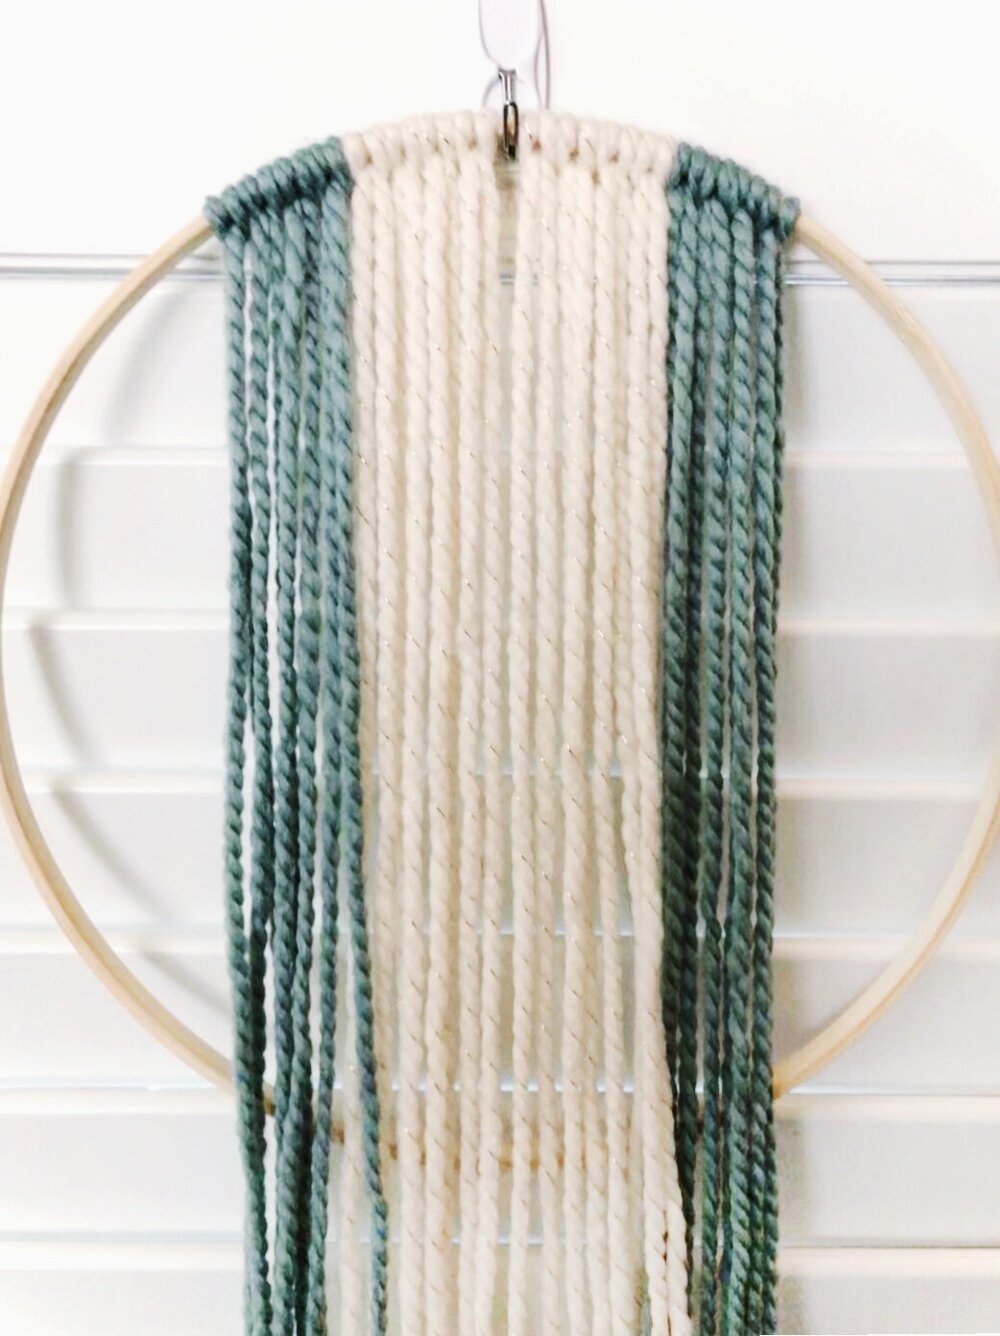  Determine the length you would like your fringe to be. Hold a folded piece of yarn at the top of the hoop and let it hang down to your desired length. Using the first strand as a guide, cut 16 strands total. Attach all strands with a Lark’s Head kno